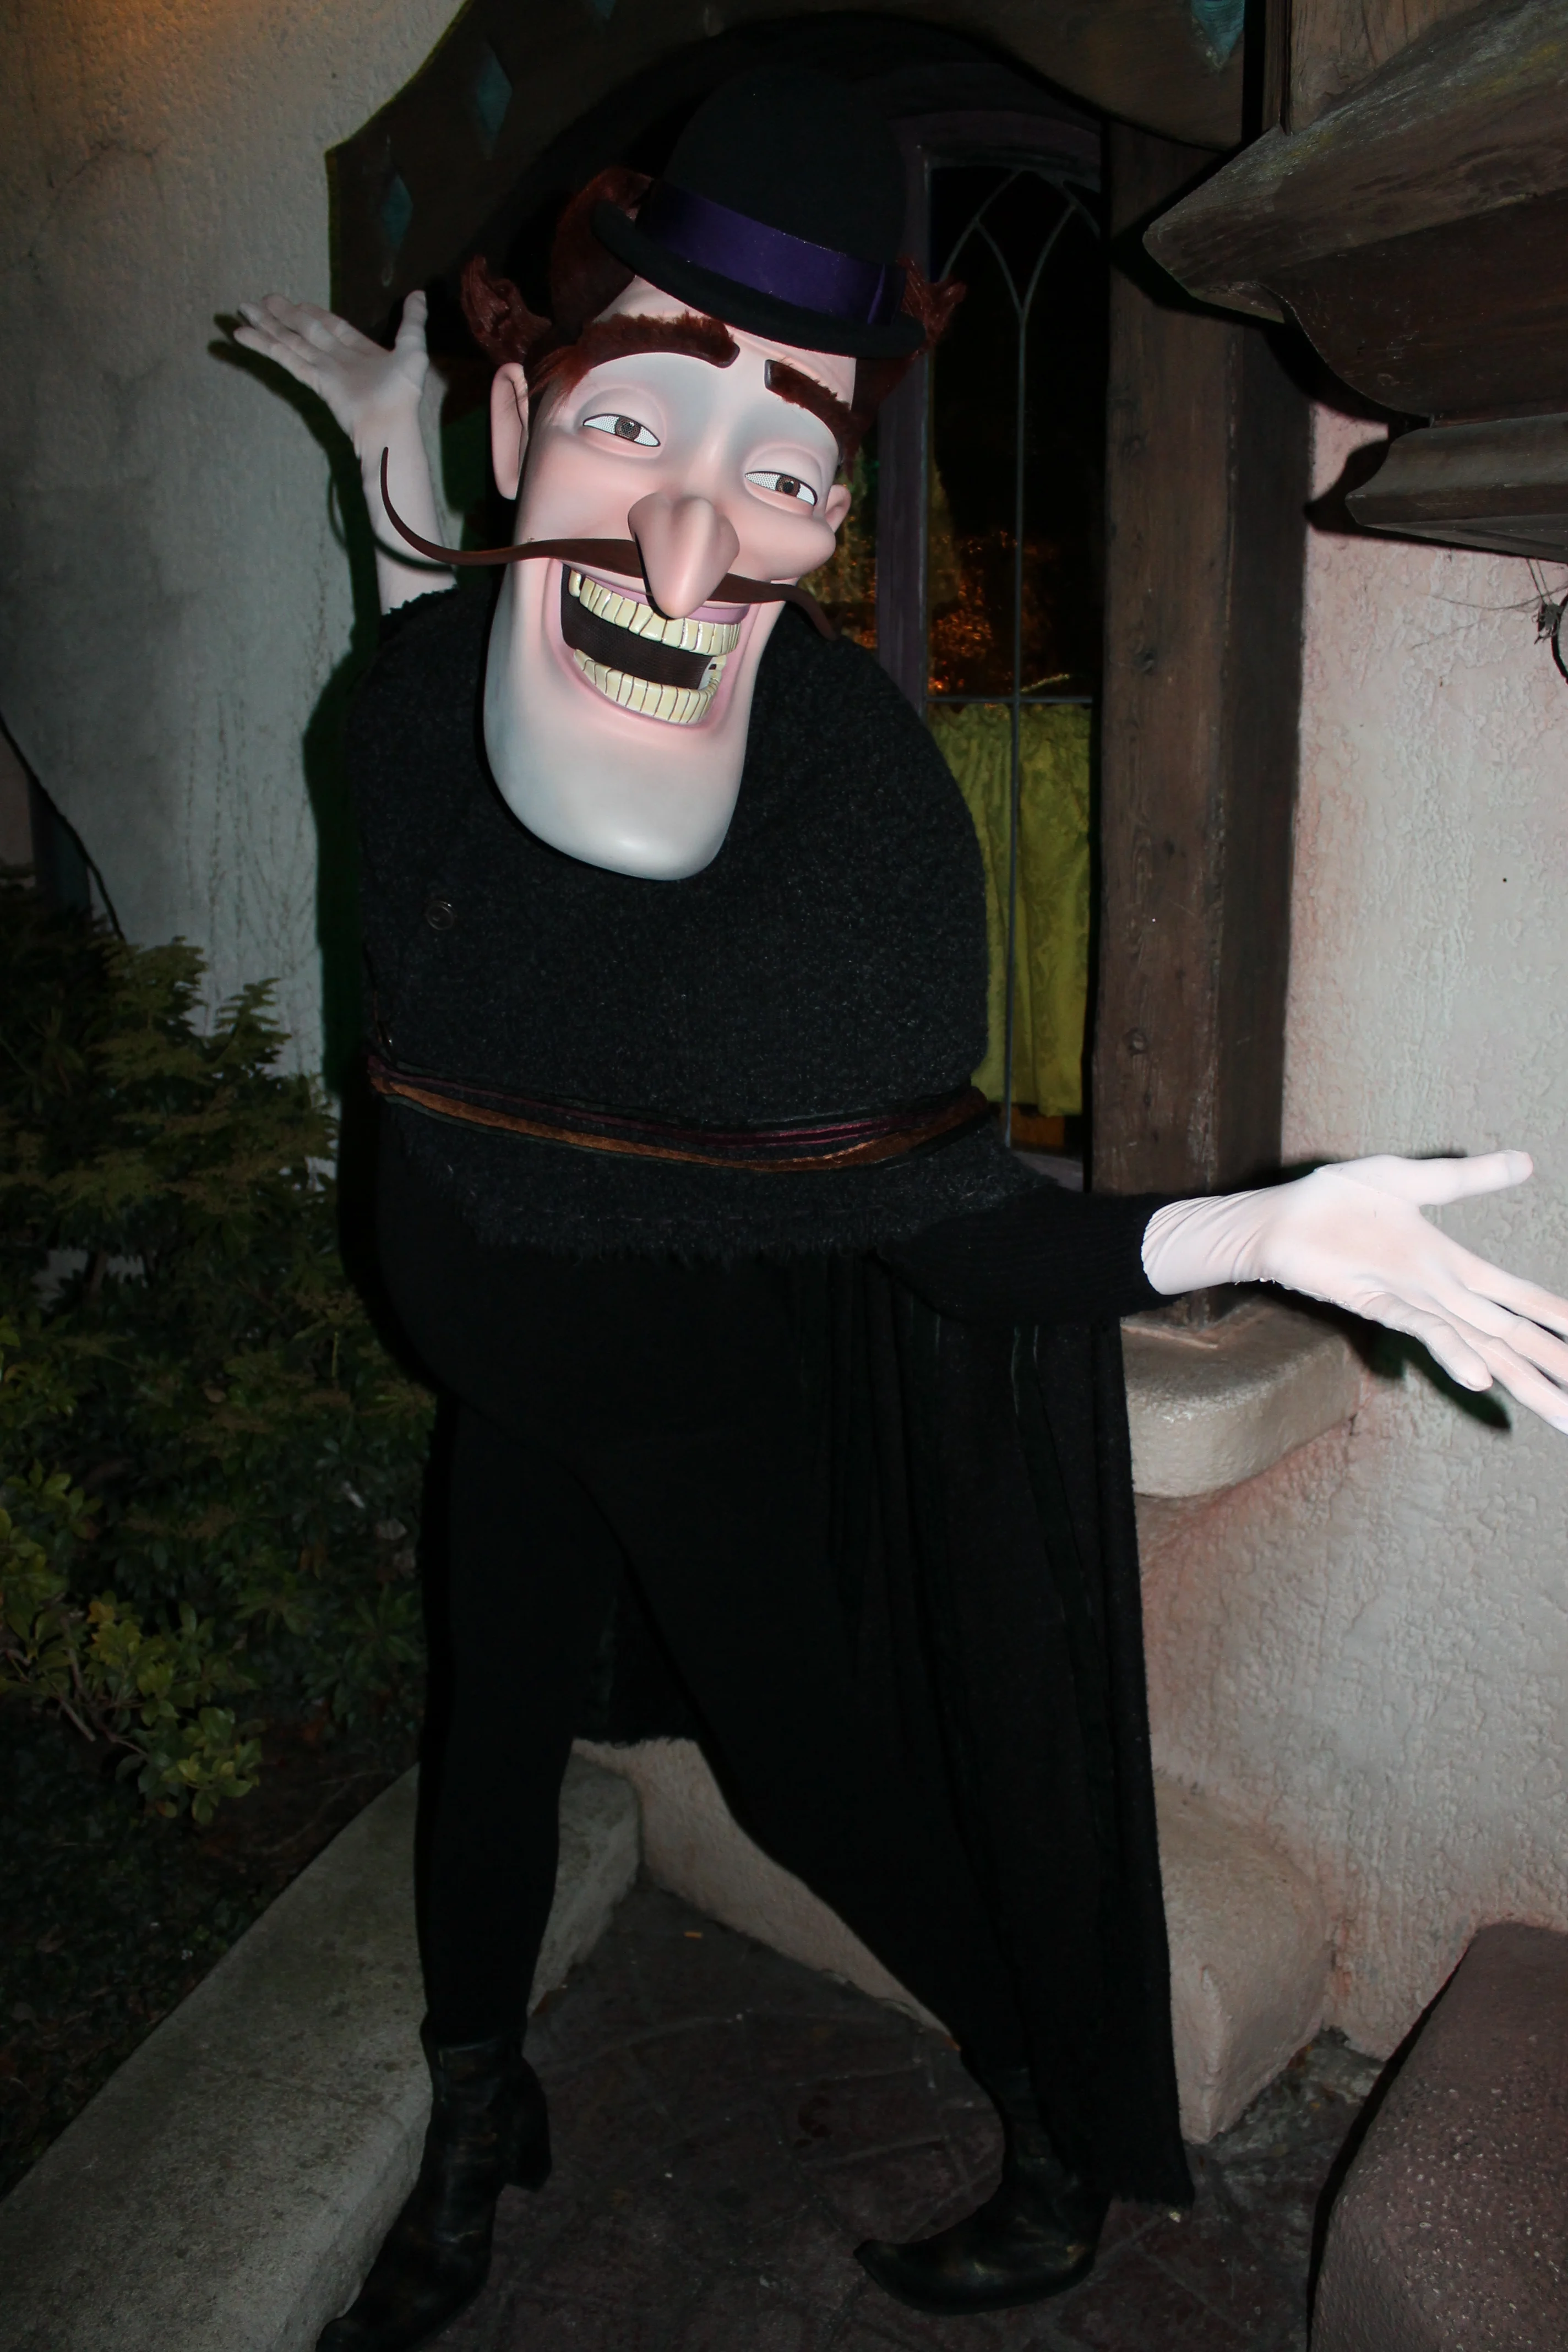 Bowler Hat Guy making an appereance during Halloween Event on the 31ste of October at DLP